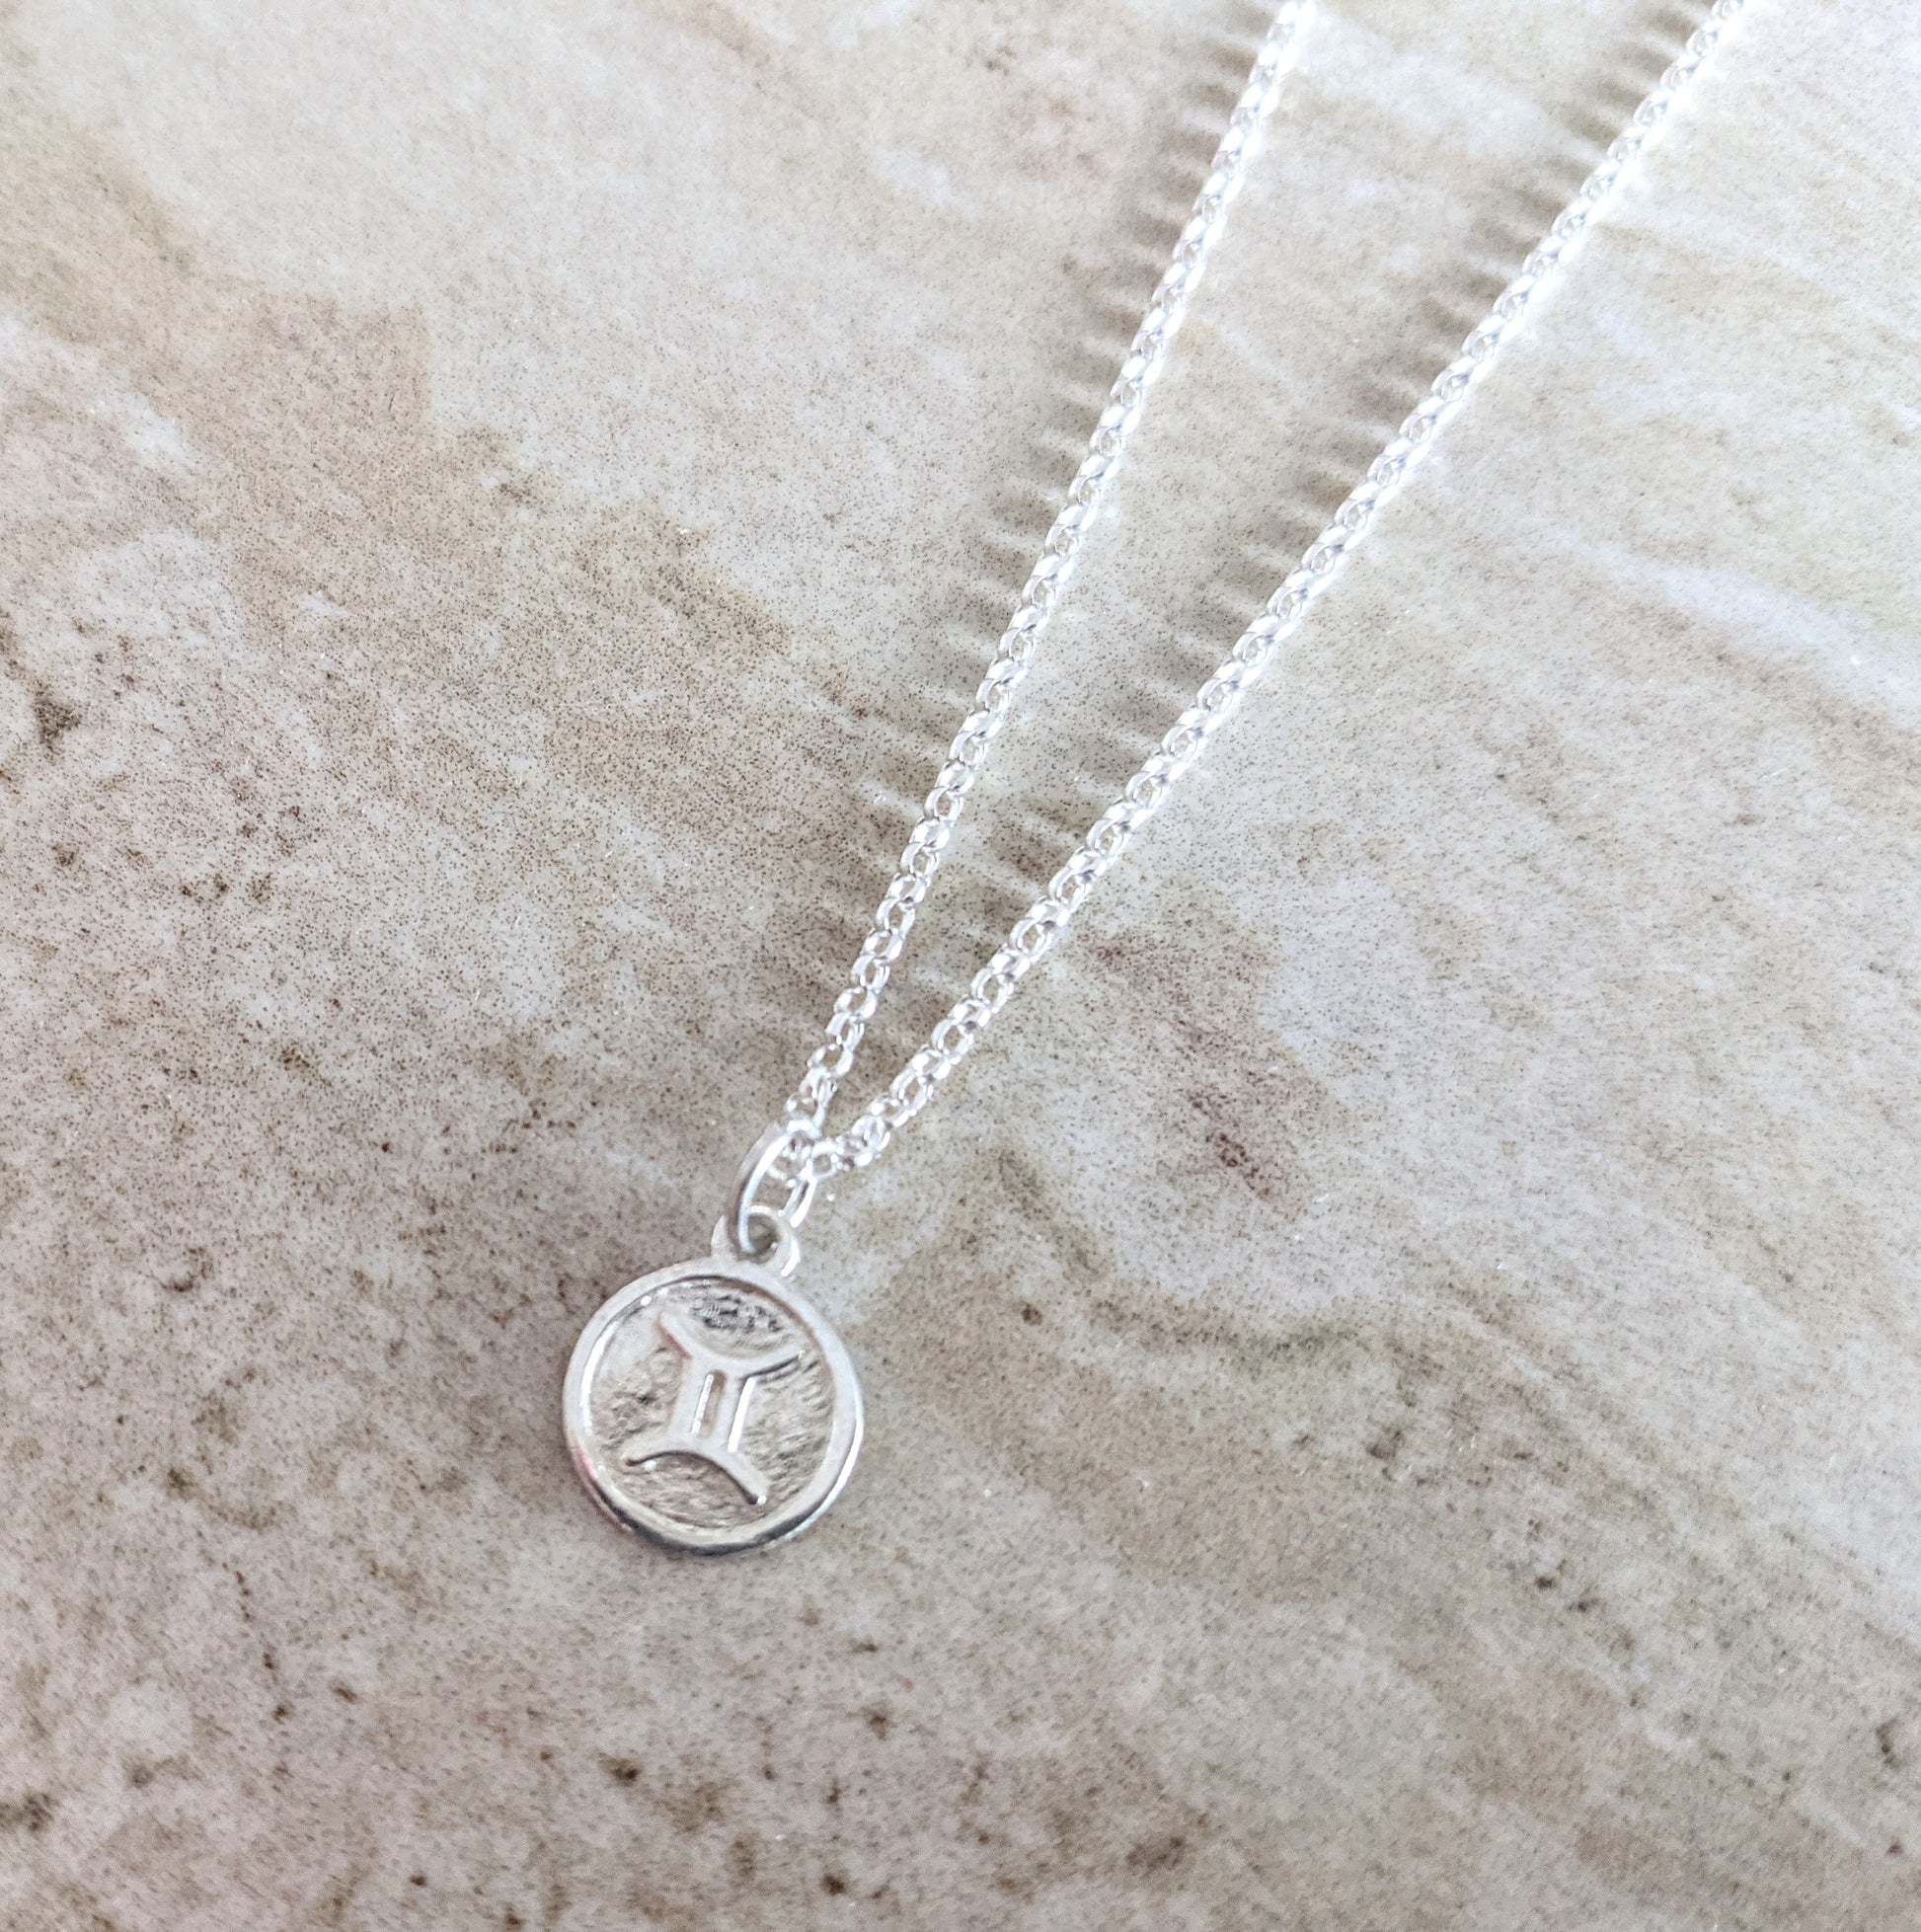 Gemini Star Sign Necklace - With Love Jewellery UK